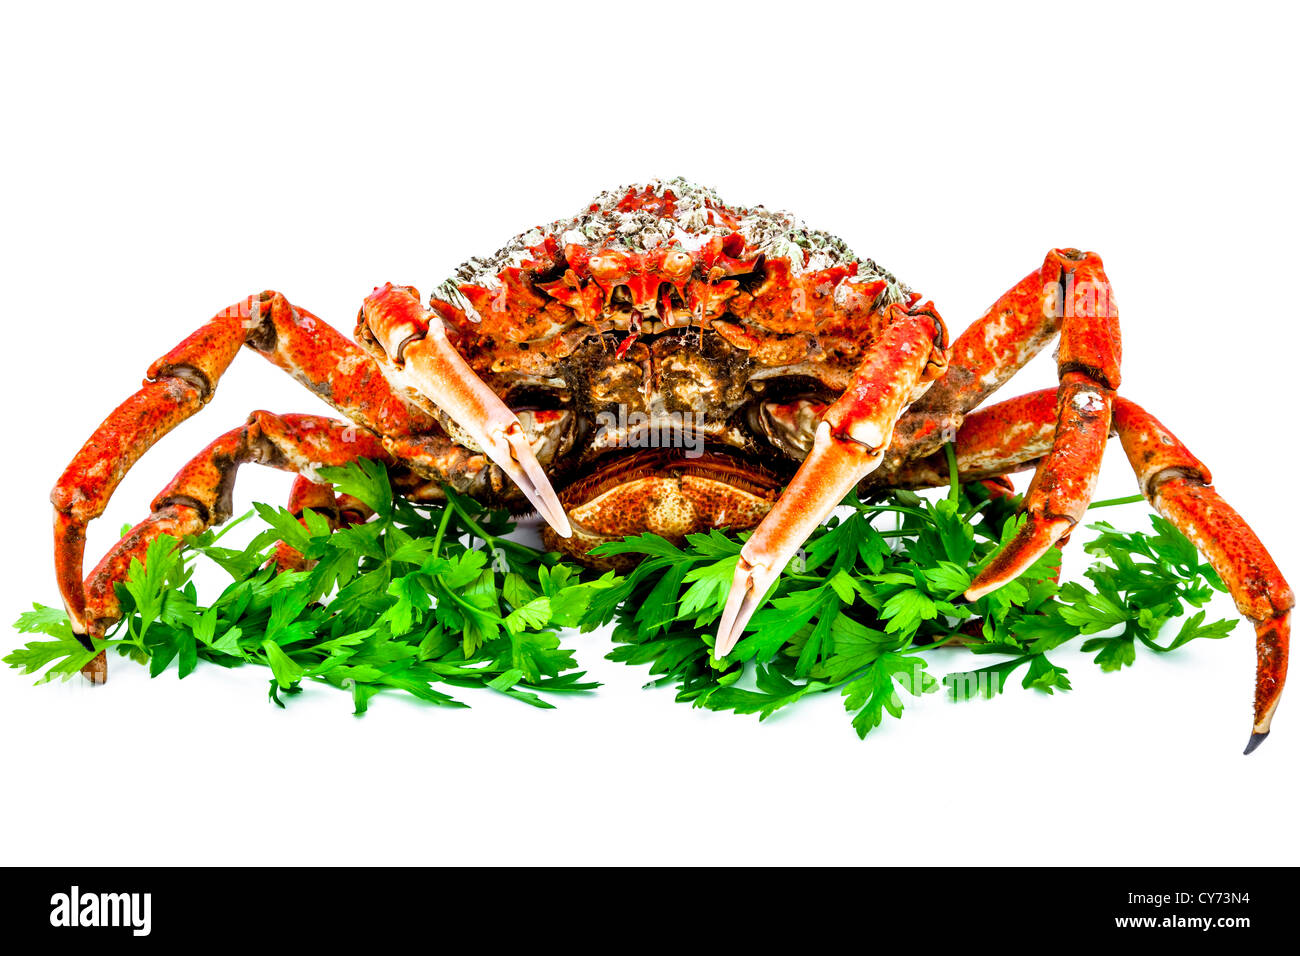 A spider crab on a white background Stock Photo